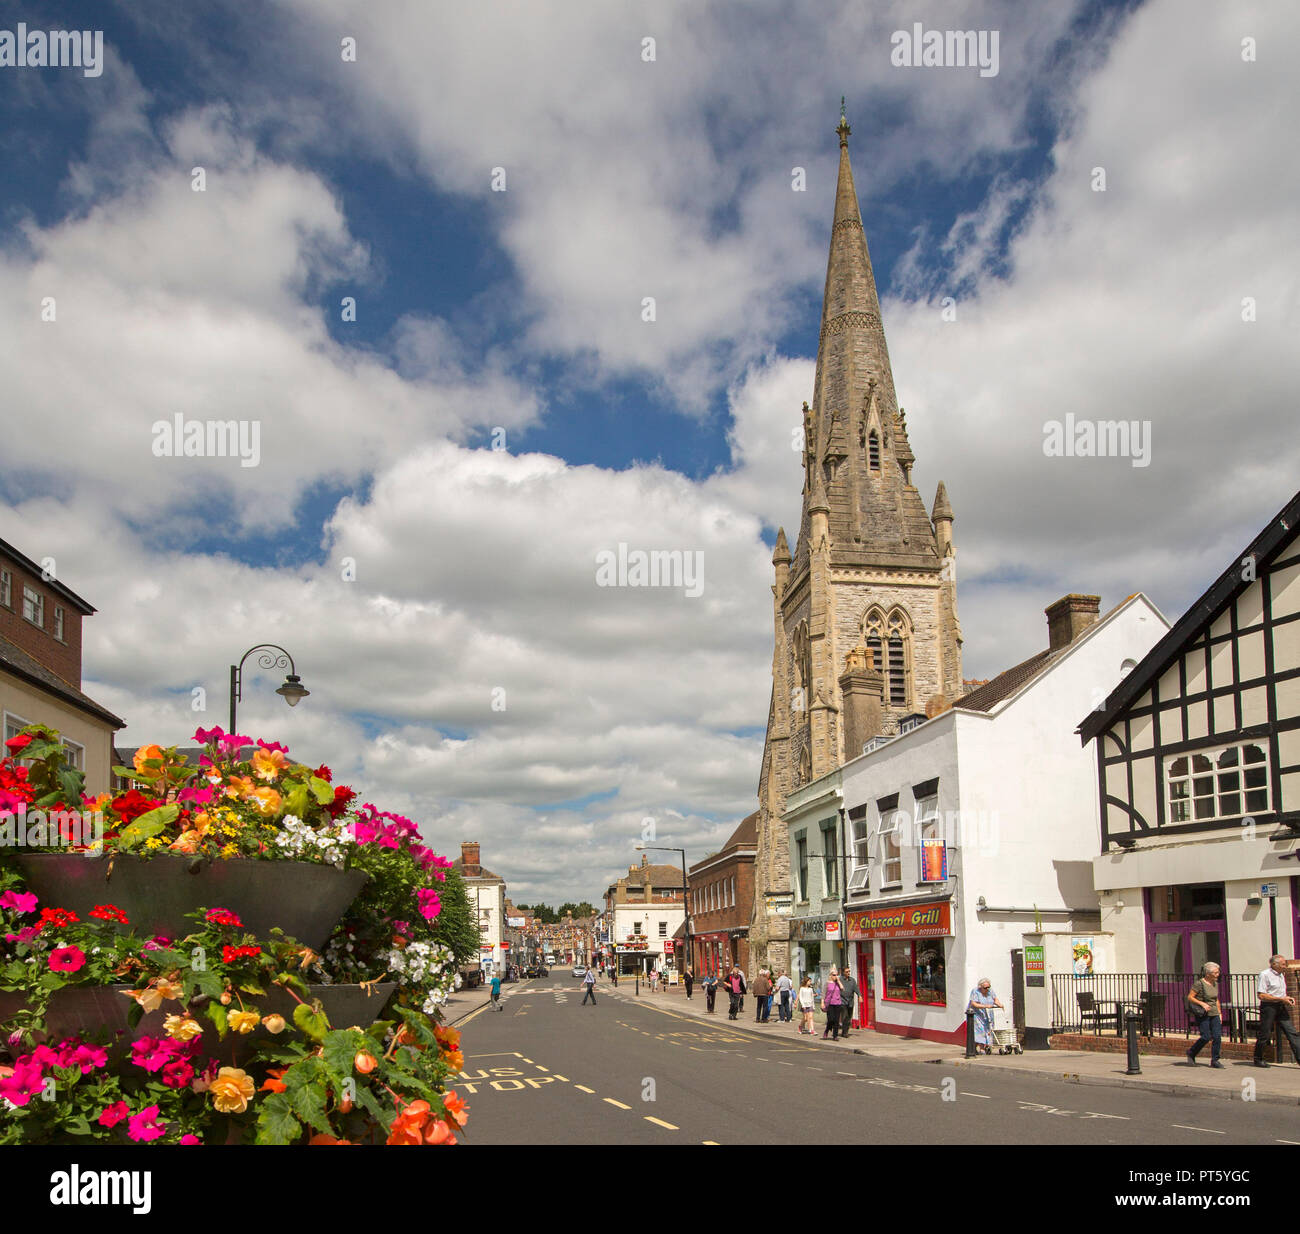 Main street in historic English town of Salisbury with shops, people strolling along footpath, colourful flowers & church spire reaching into blue sky Stock Photo